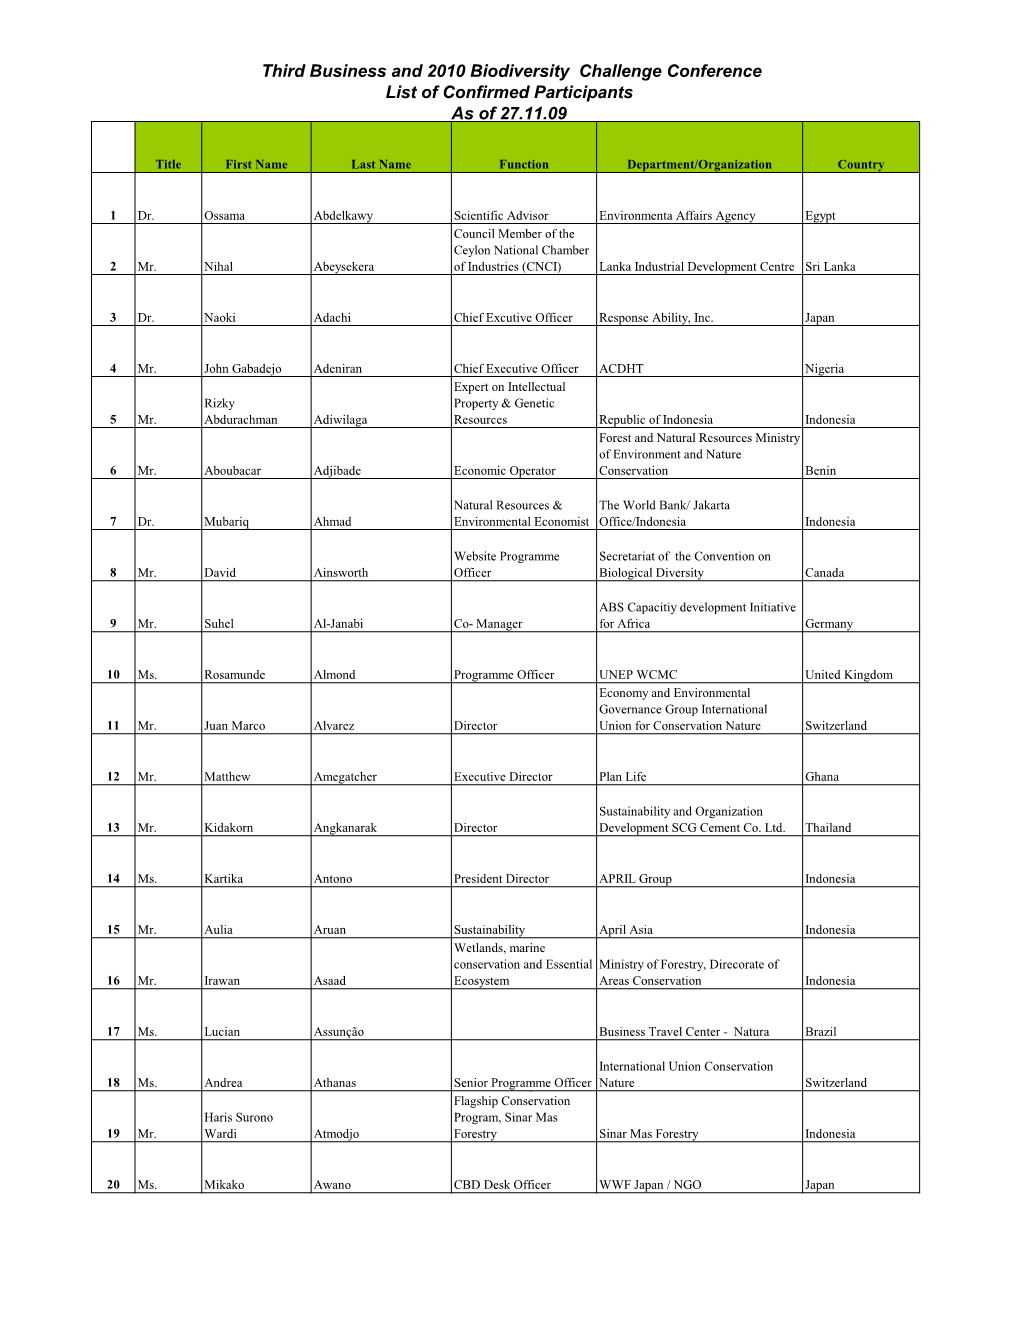 Third Business and 2010 Biodiversity Challenge Conference List of Confirmed Participants As of 27.11.09